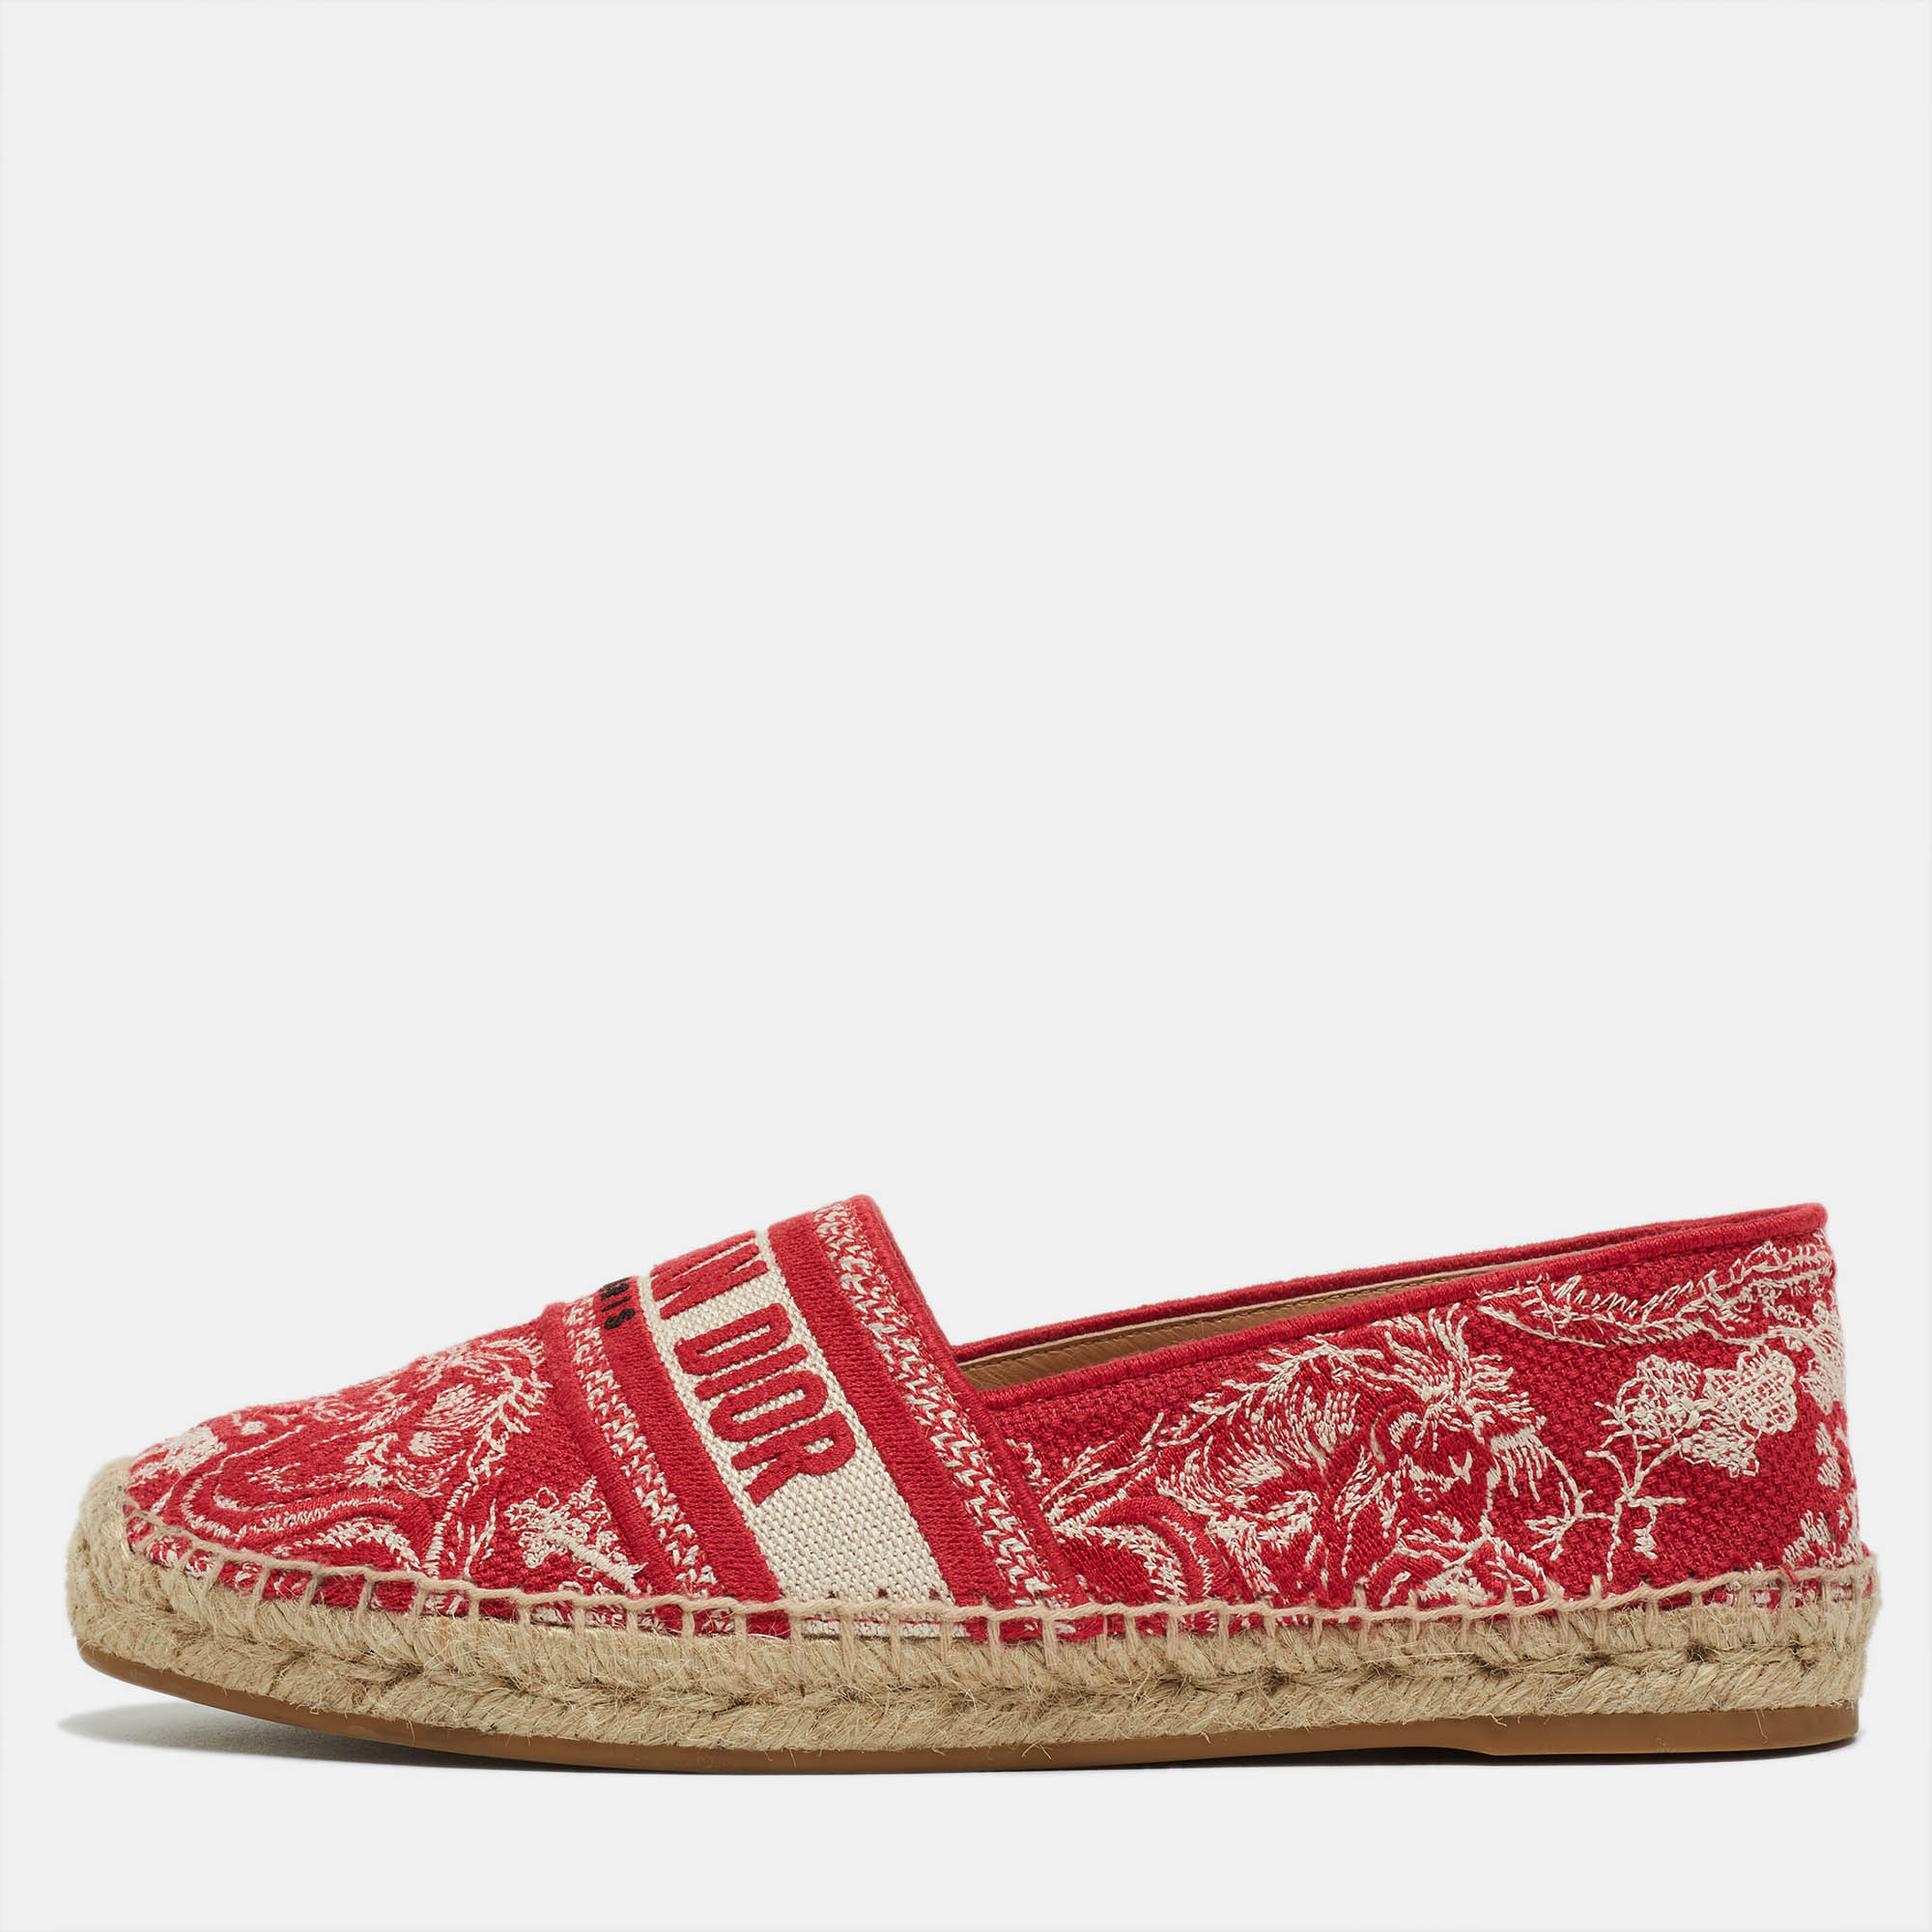 Dior White/Red Floral Embroidered Canvas Granville Espadrille Flats Size 39